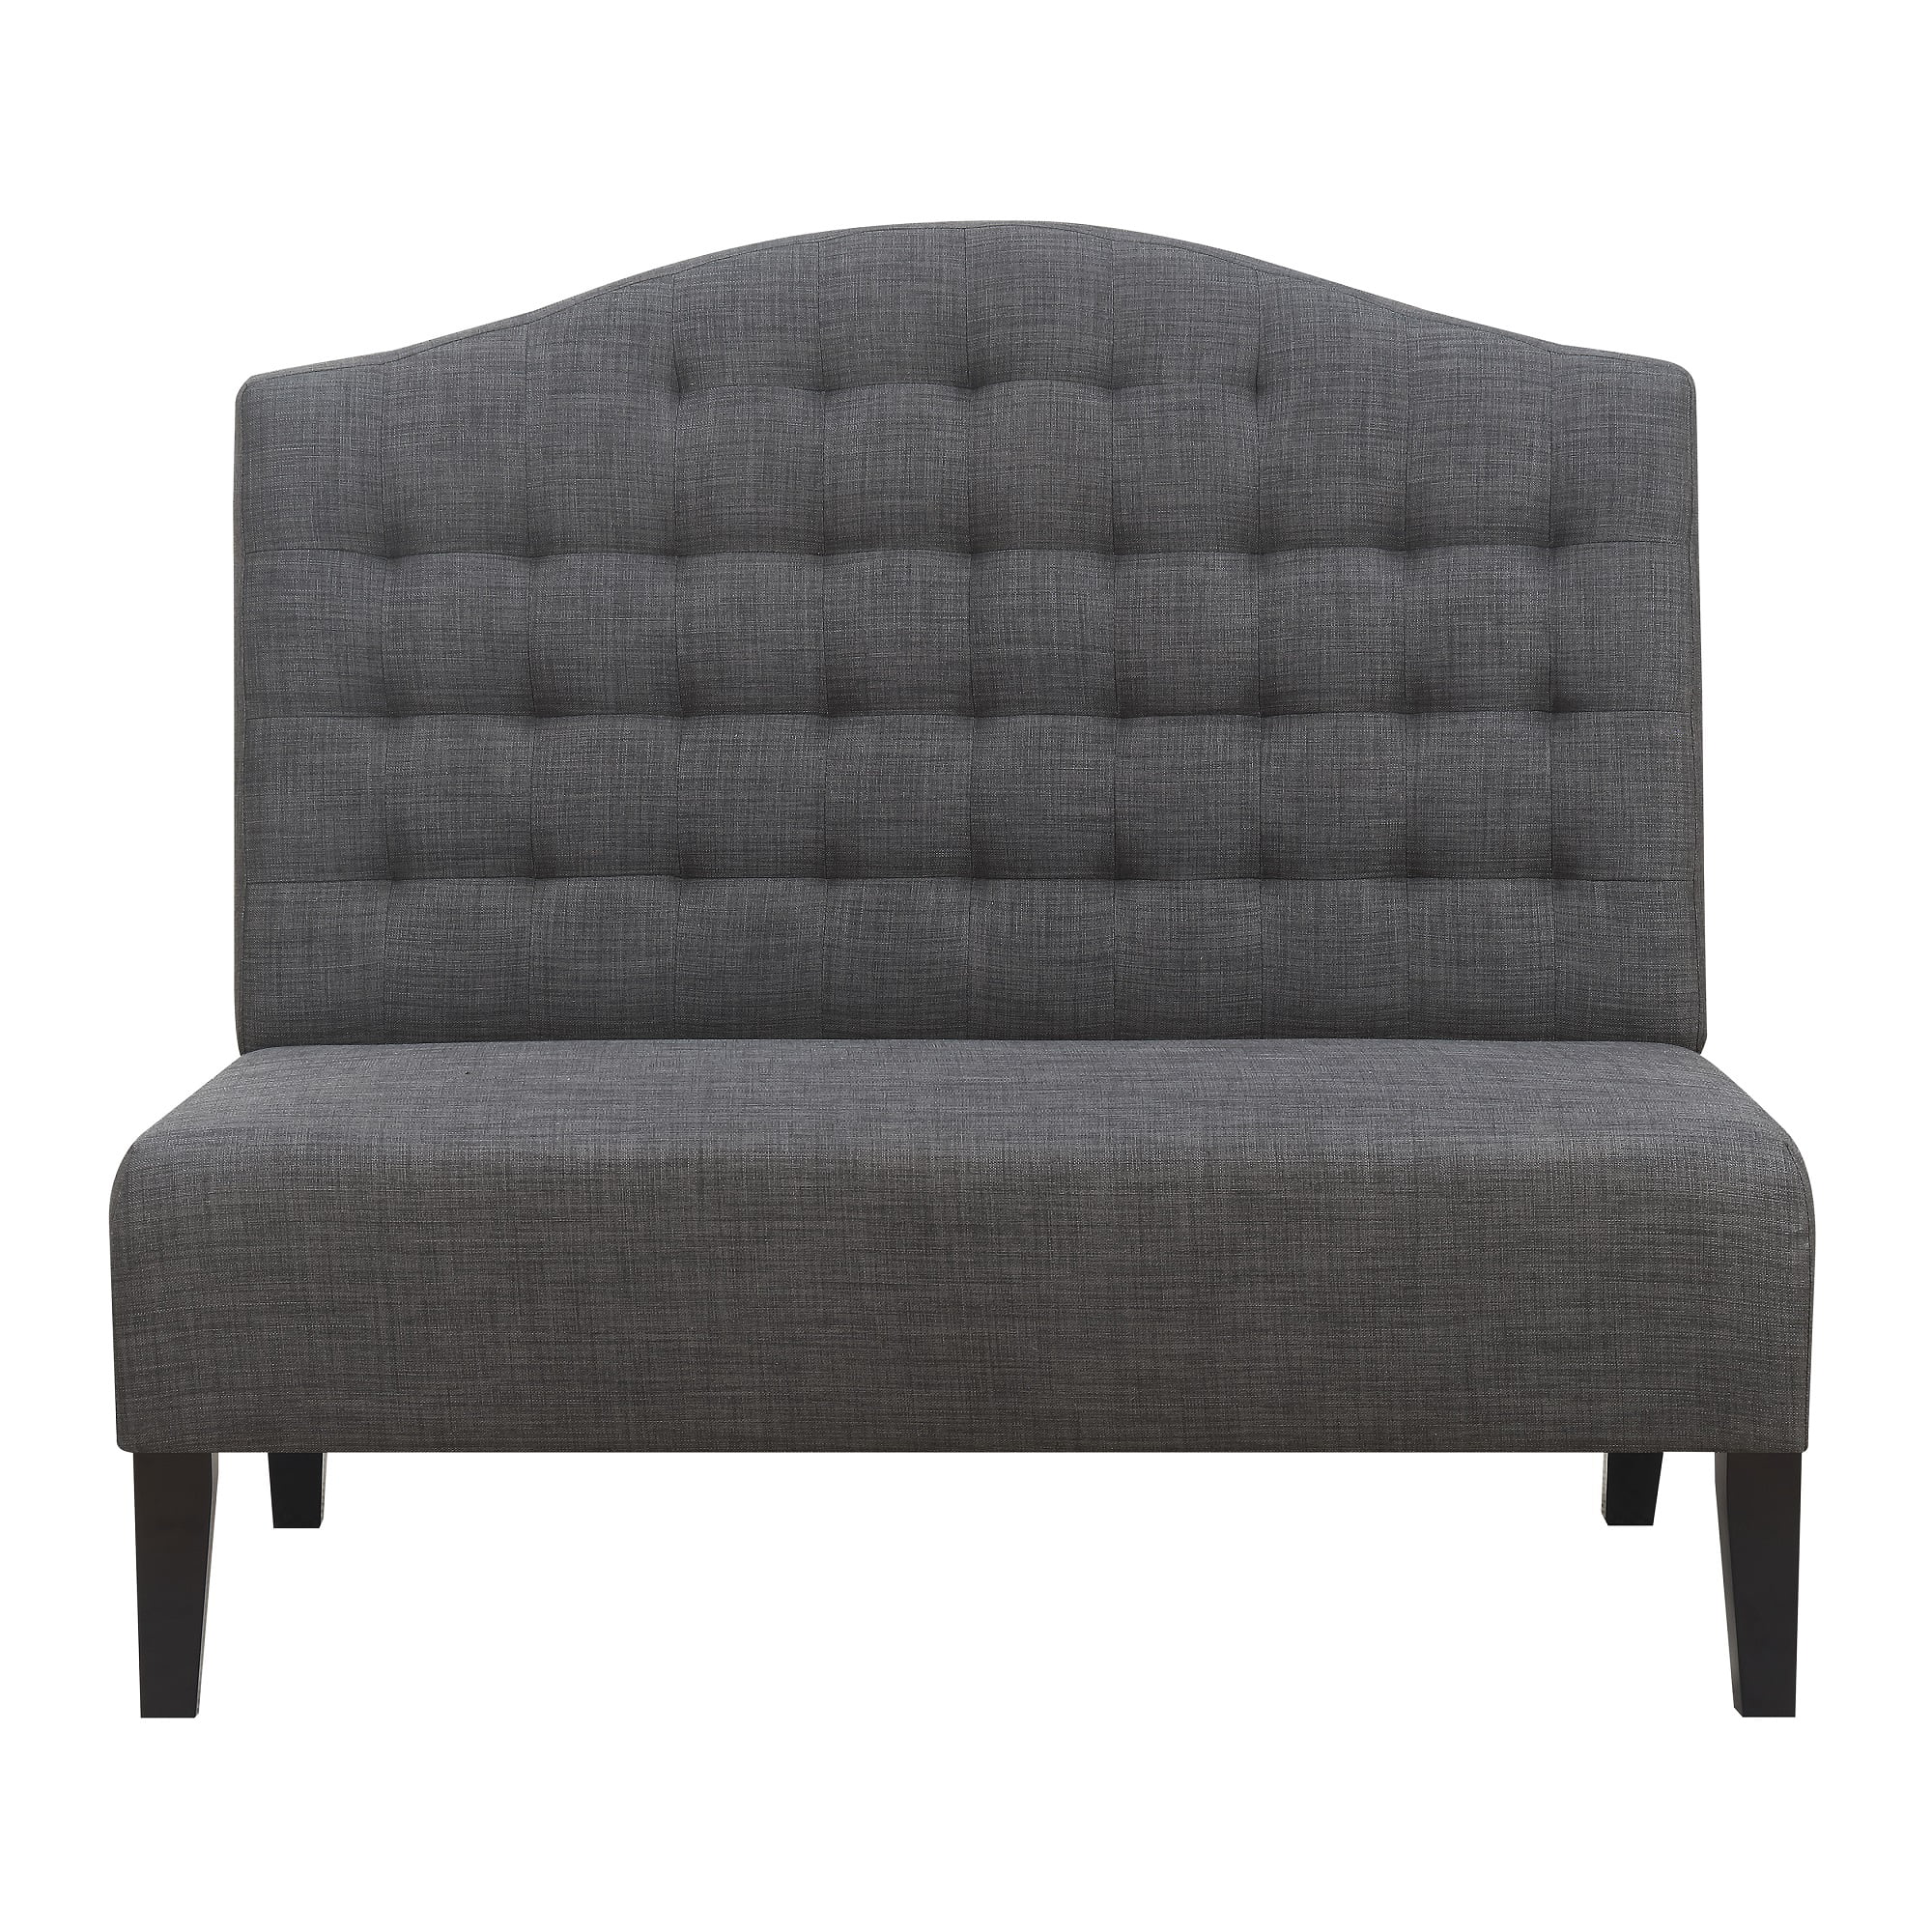 HomeFare Biscuit Tufted Entryway Bench in Slate Gray